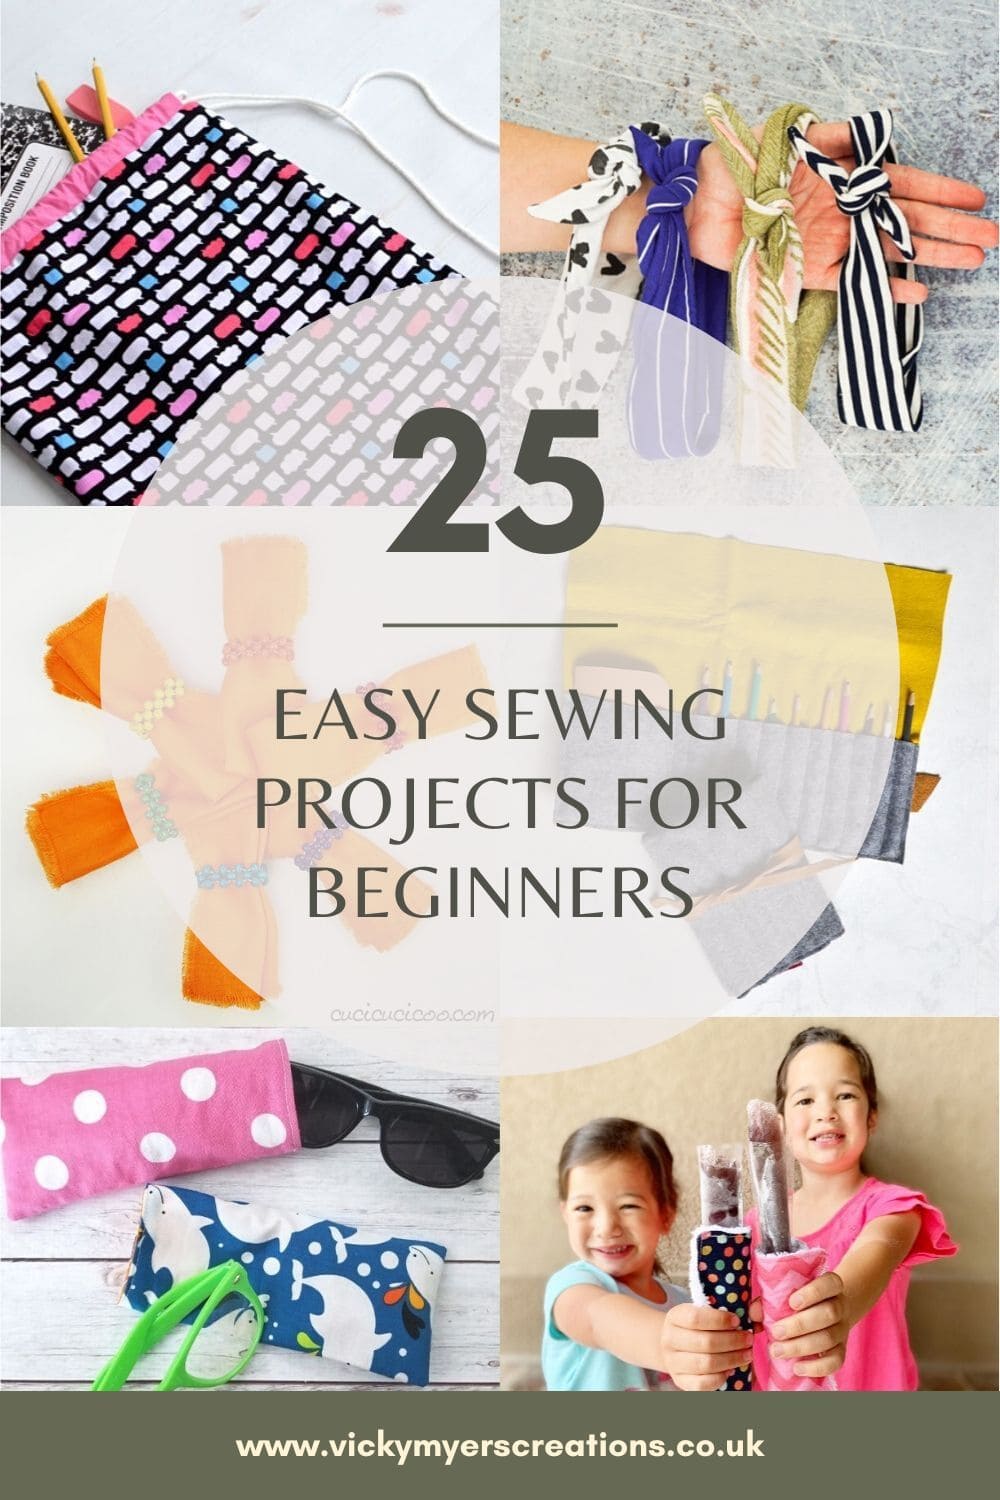 Fabulous range of easy sewing projects perfect for the beginner, let's get inspired, dust down out sewing machines and make something!